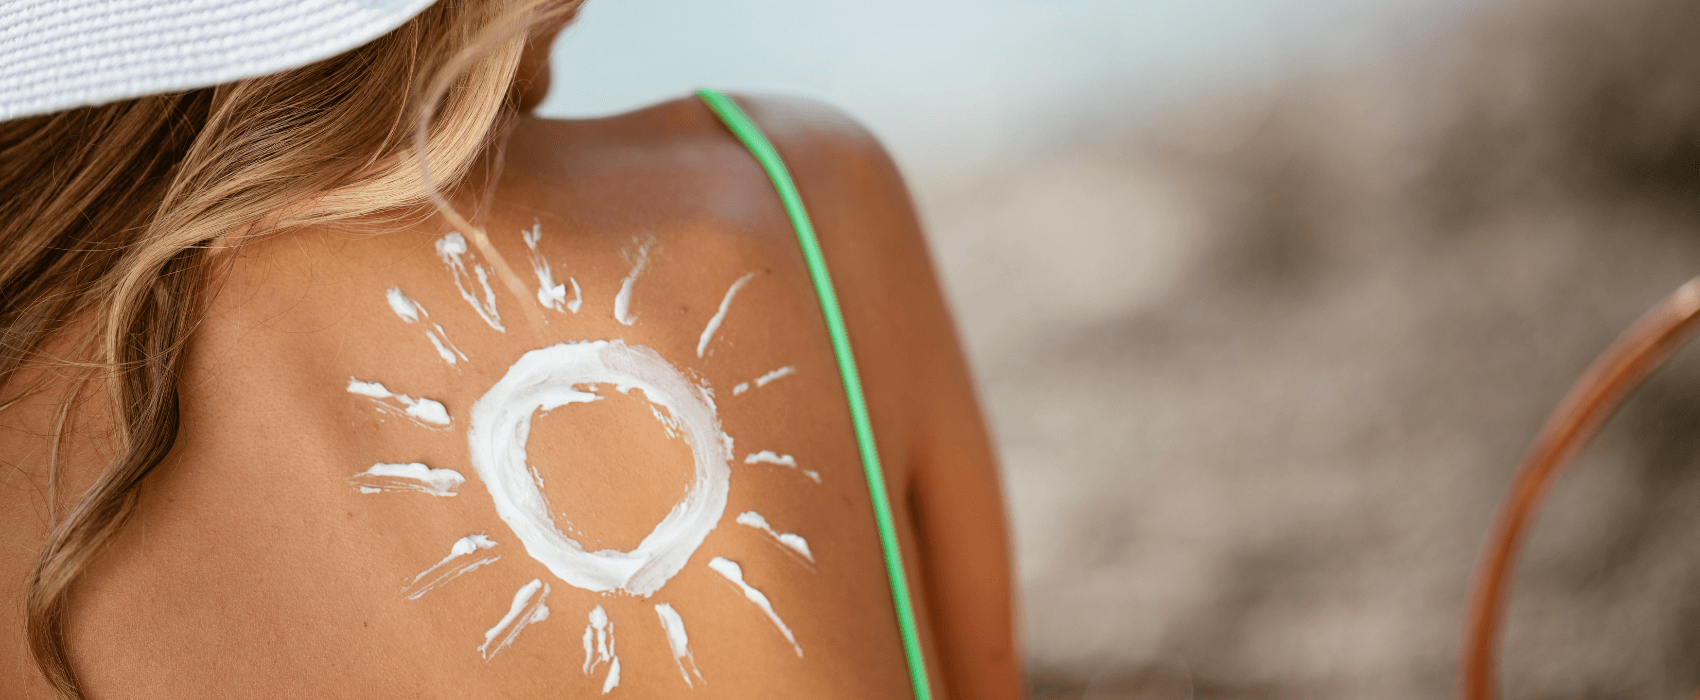 Blog - The ultimate guide to the best sunscreens